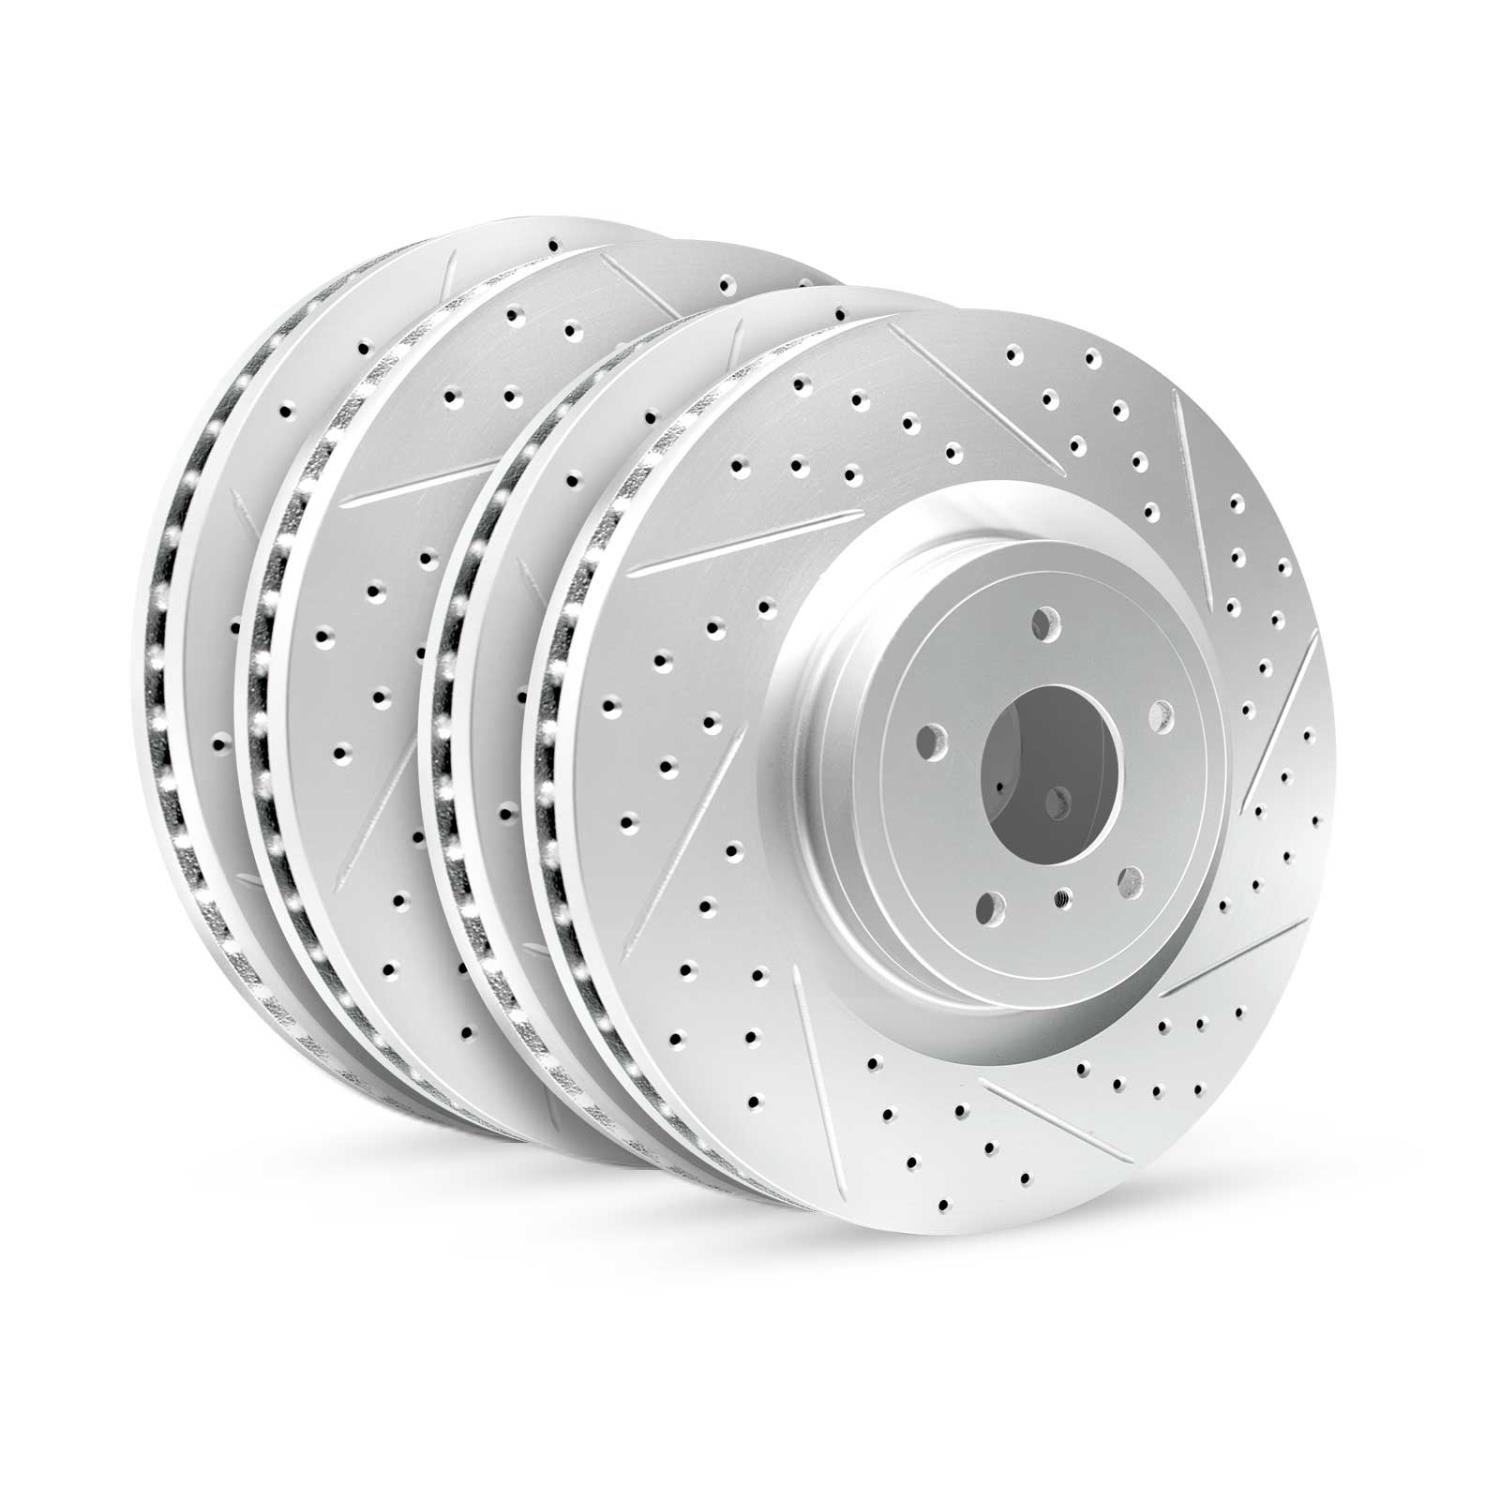 GEO-Carbon Drilled/Slotted Rotors, 2015-2017 Kia/Hyundai/Genesis, Position: Front/Rear